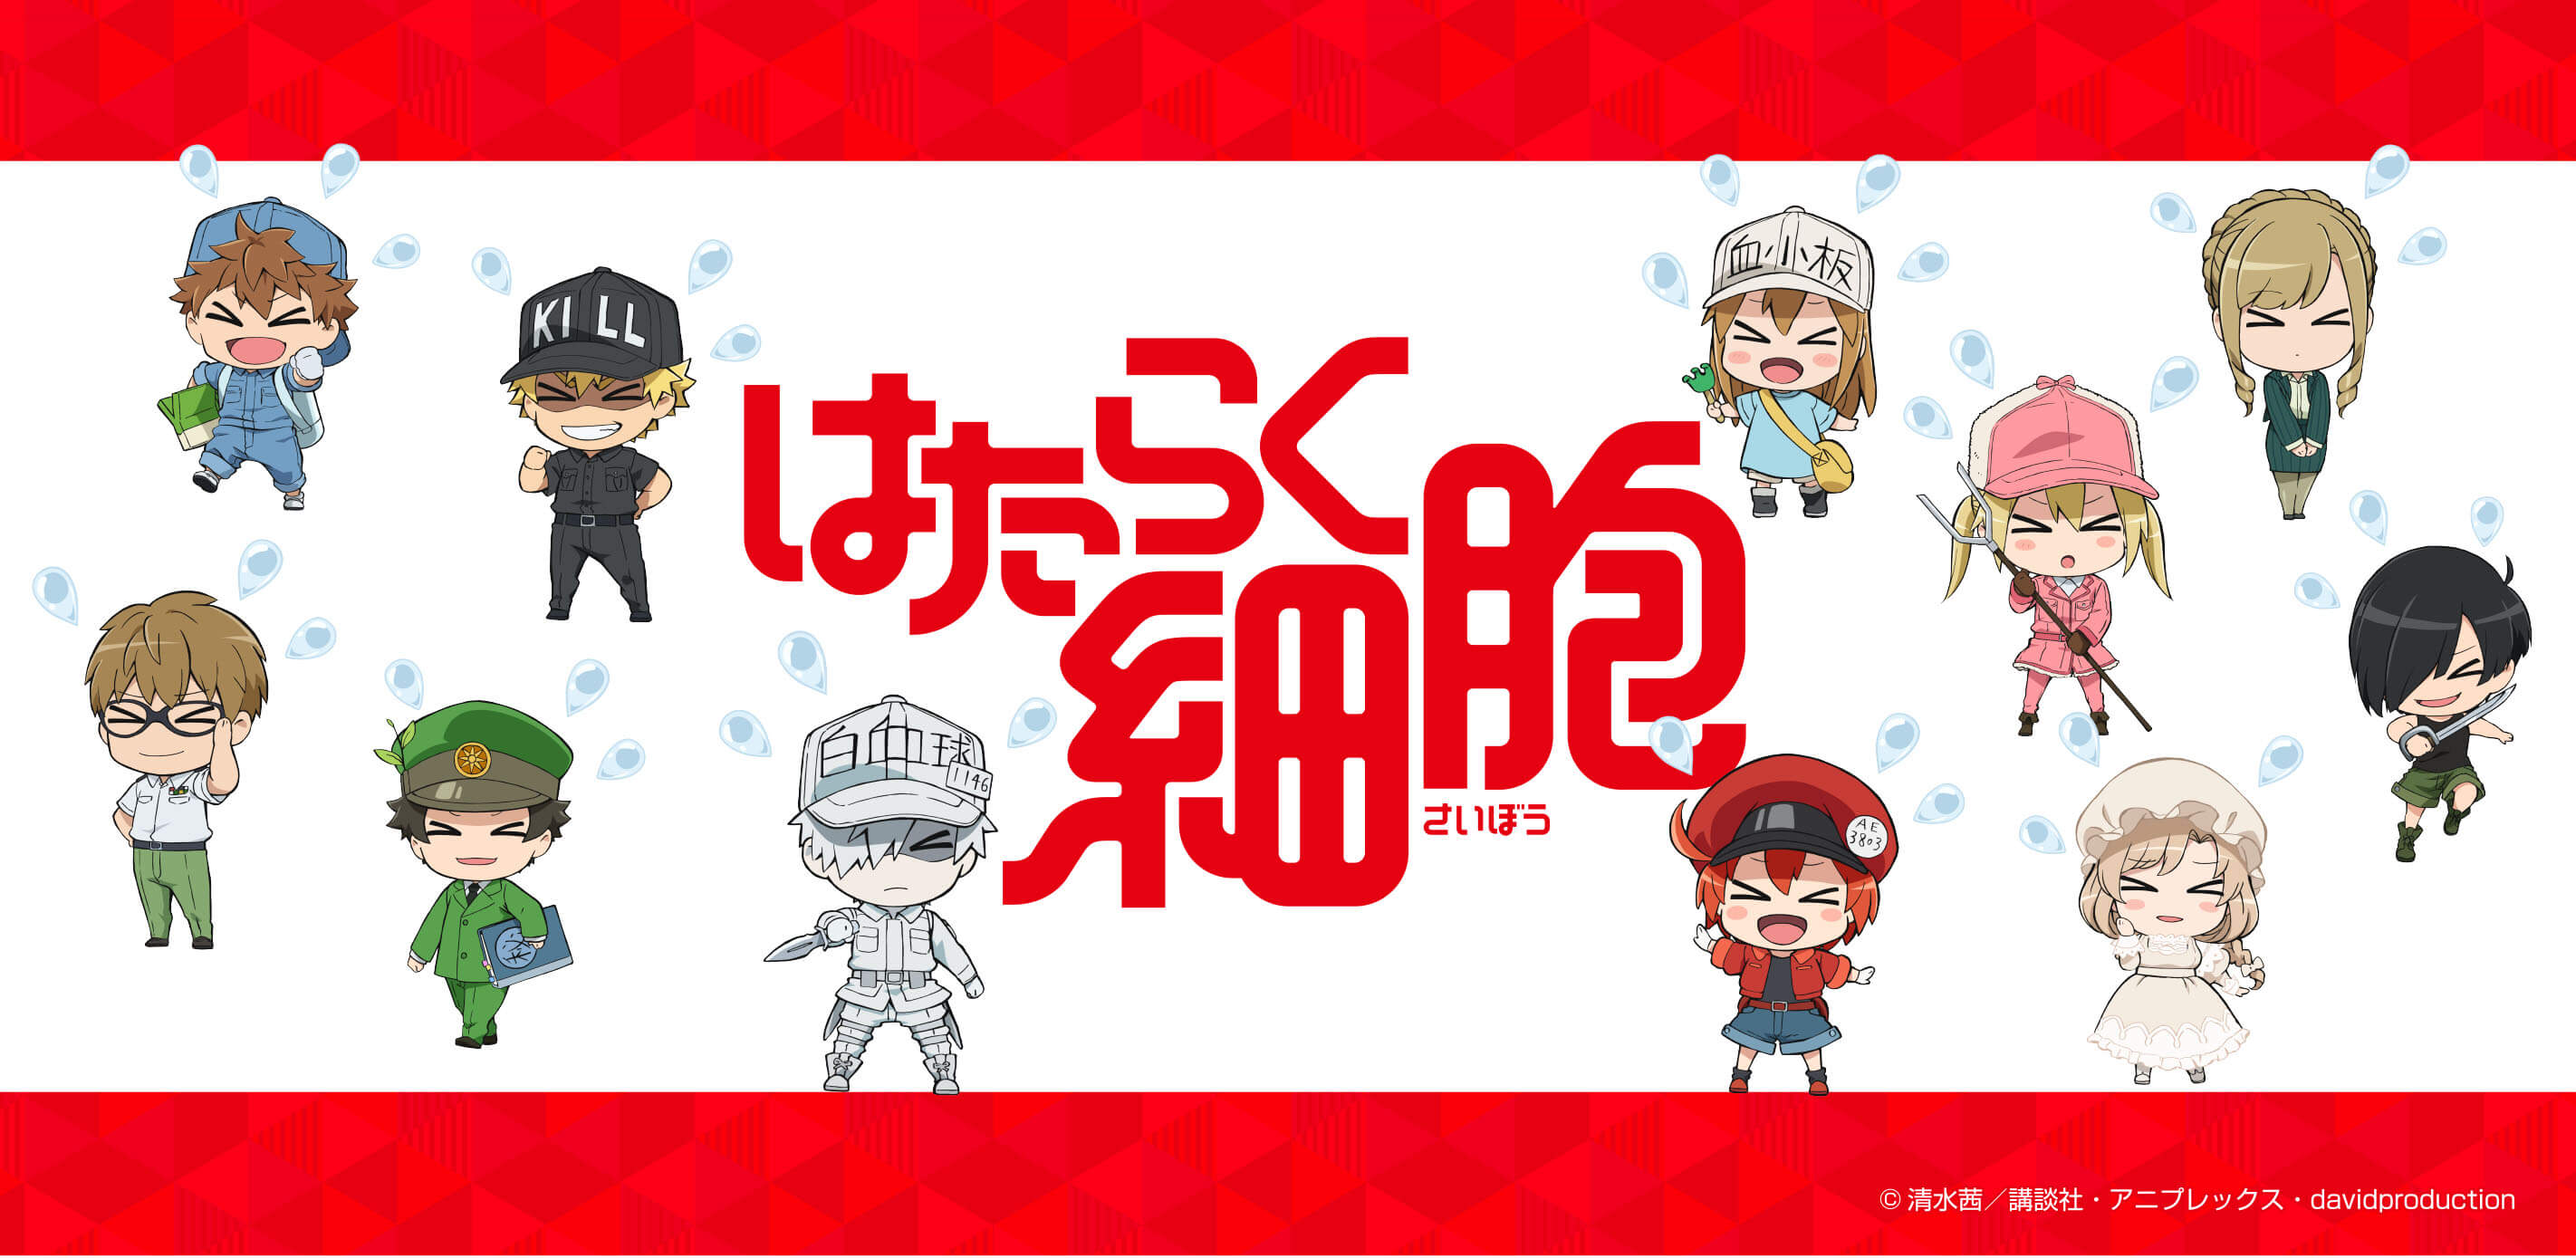 Cells at Work! to Get Live Action Film!, Anime News